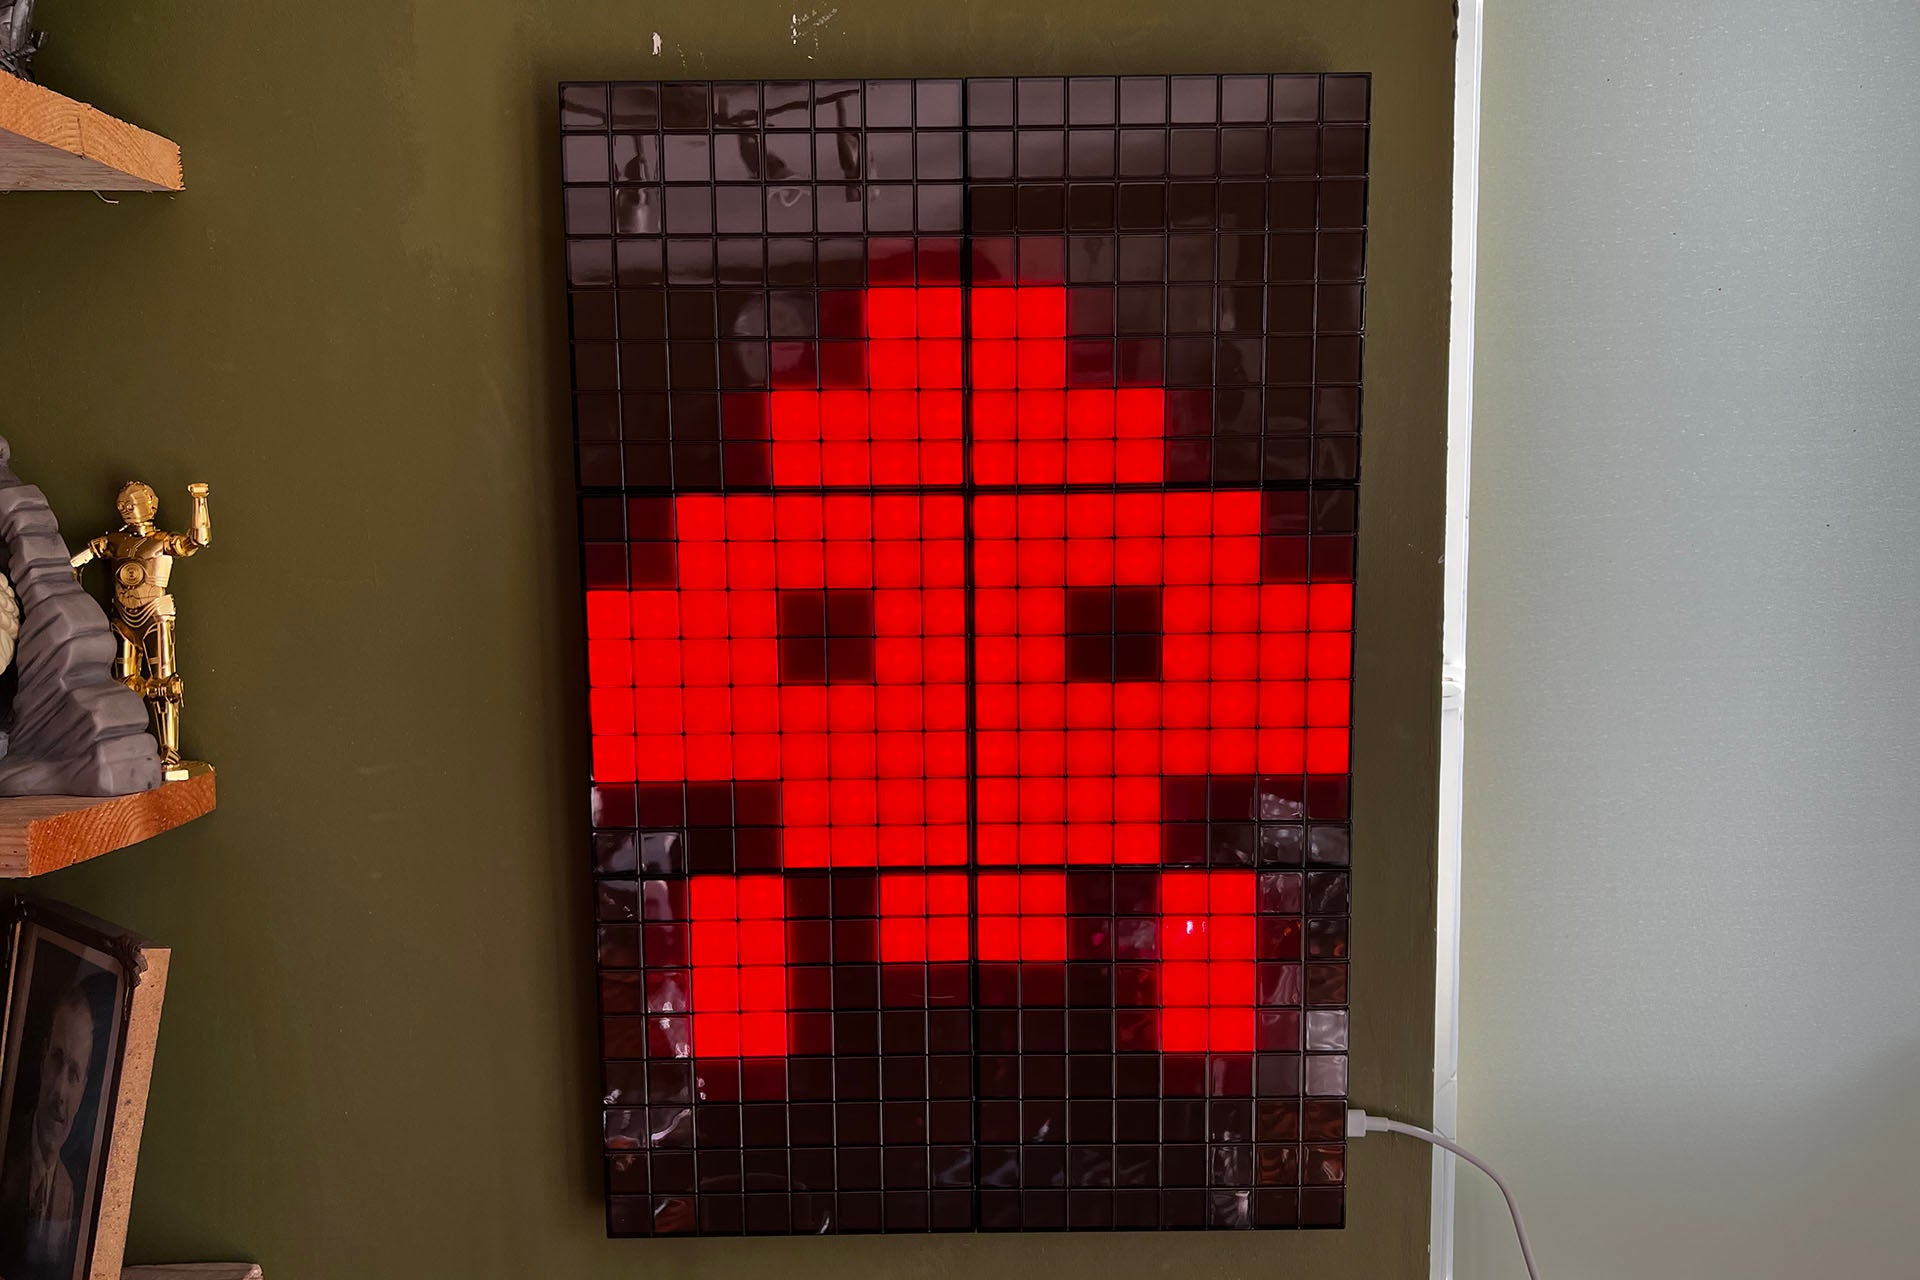 Twinkly Squares invader